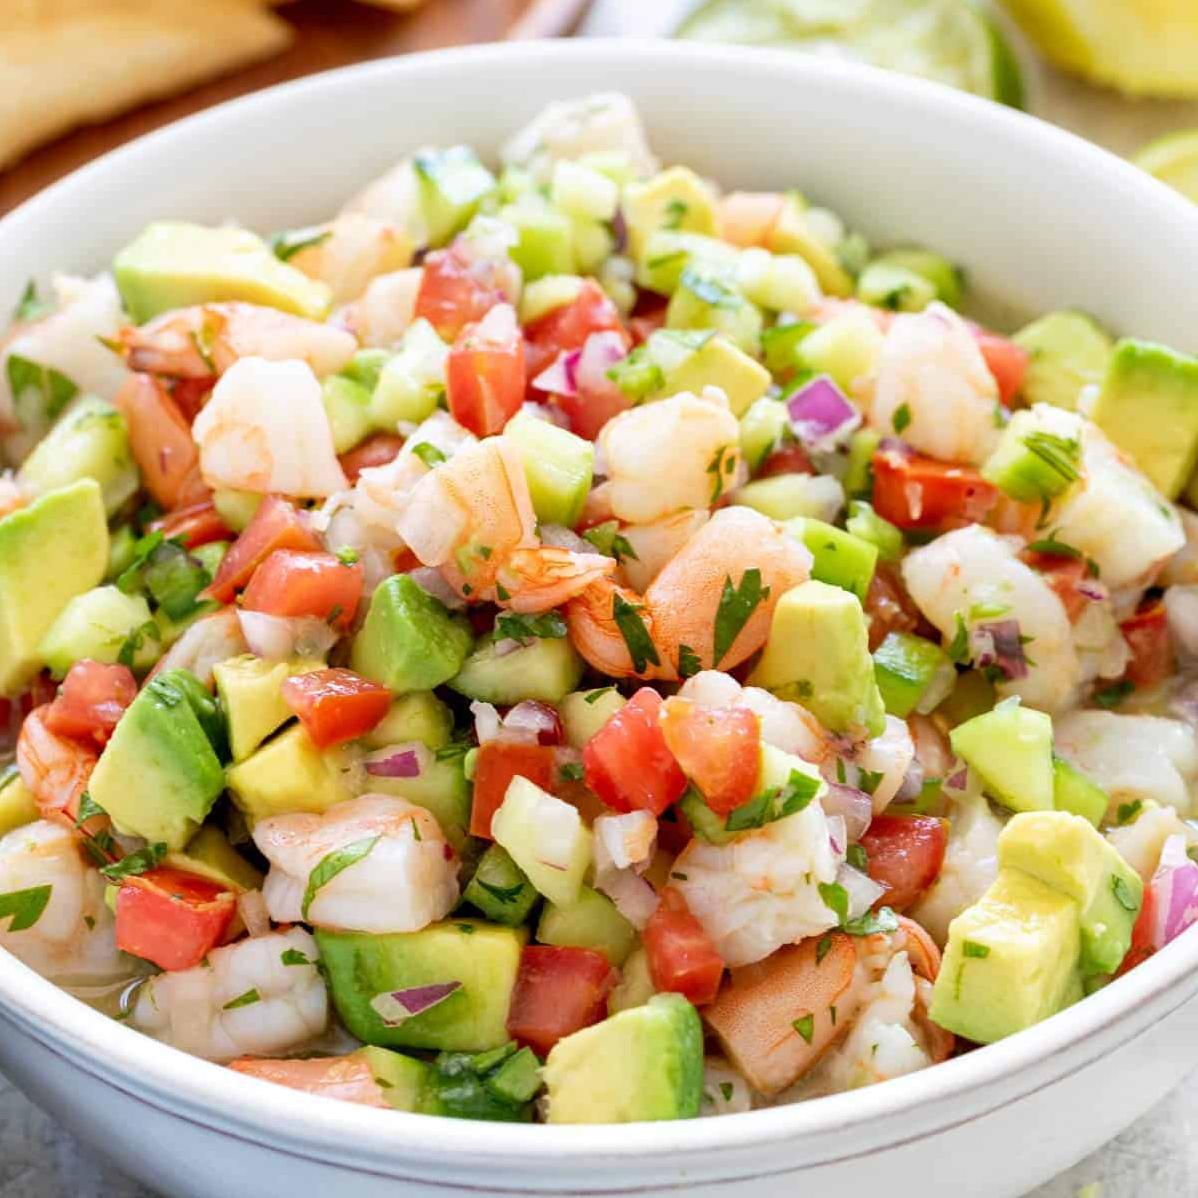  Serve up a taste of the sea with this delicious shrimp ceviche.